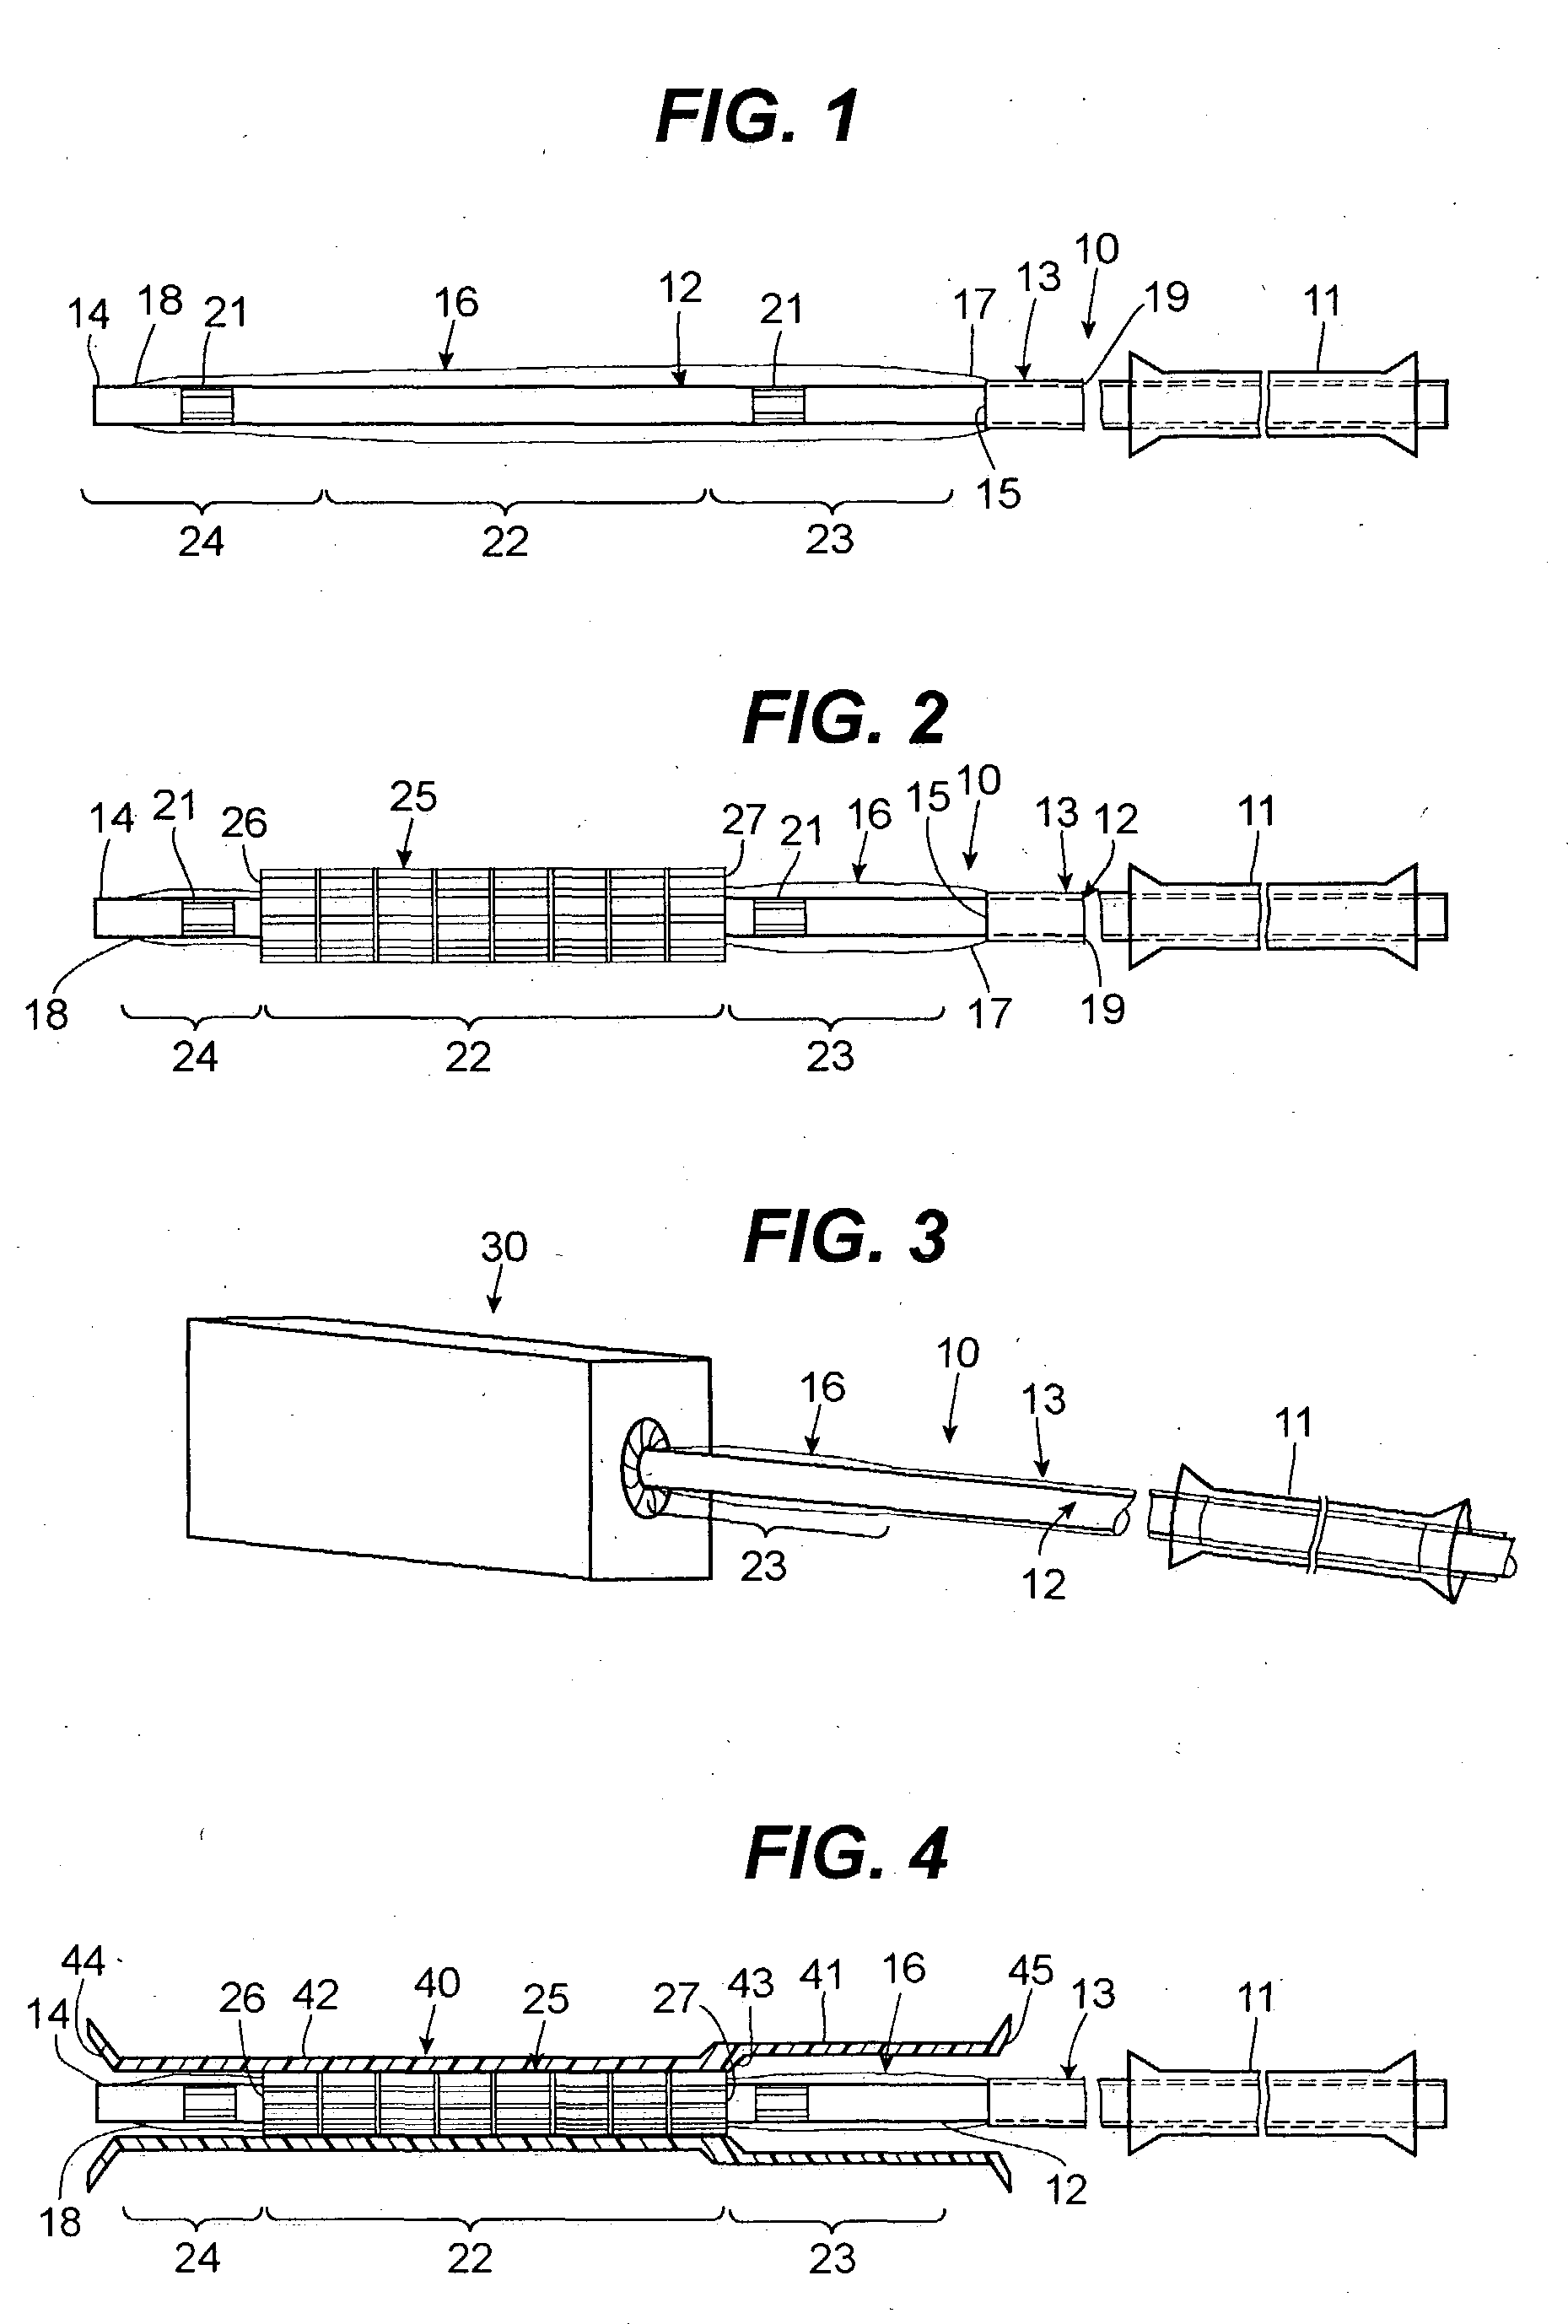 Asymmetric stent delivery system with proximal edge protection and method of manufacture thereof